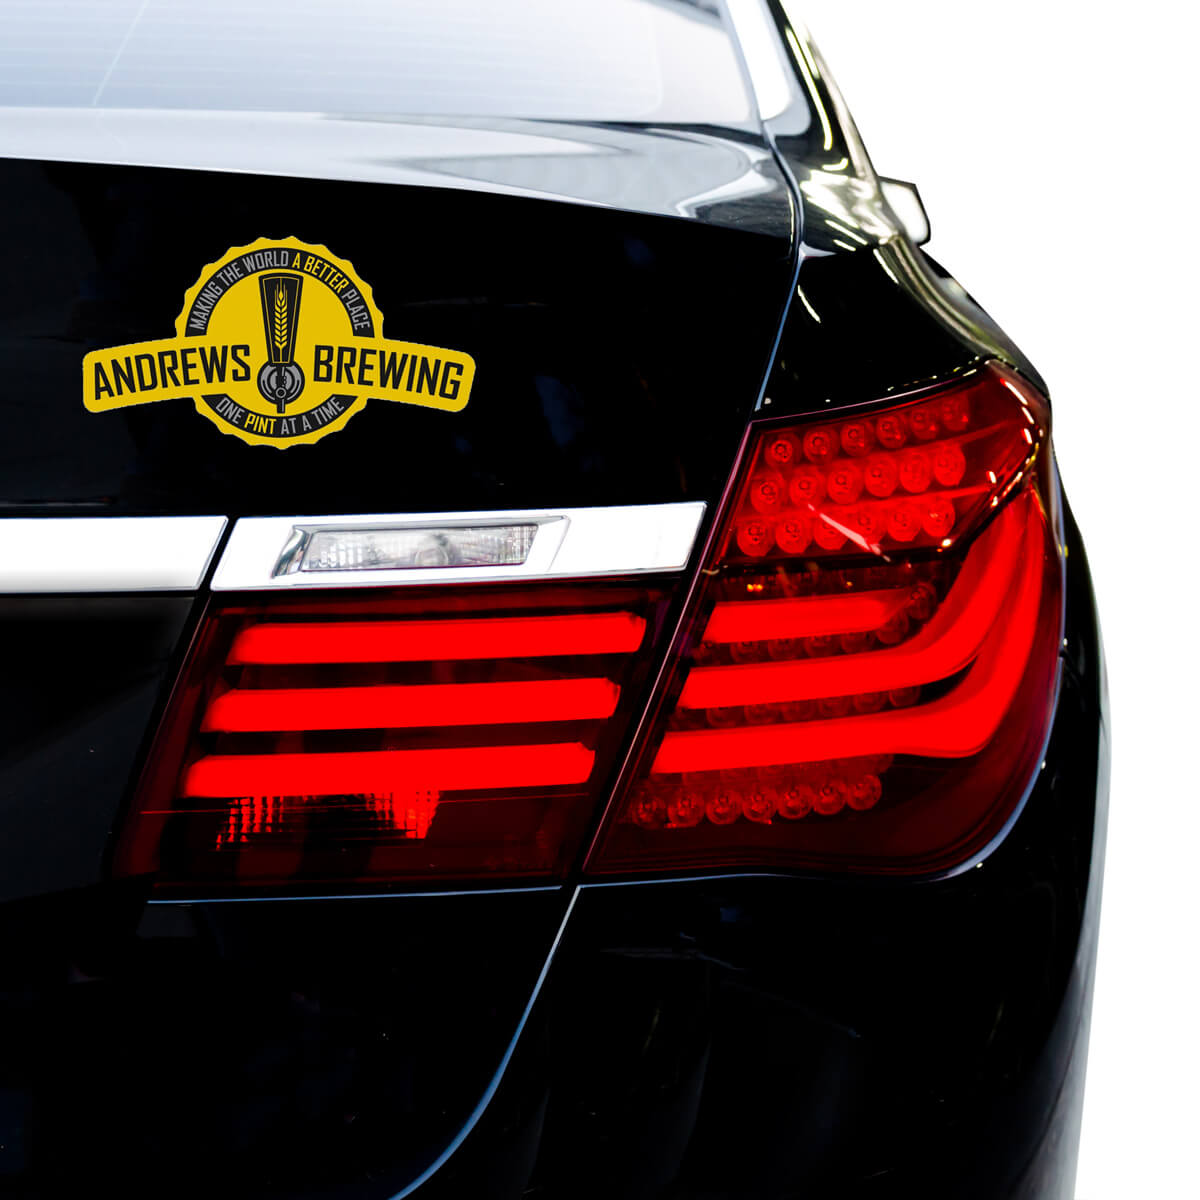 Black car bumper with die cut yellow badge bumper sticker promotional decal label by Curative Printing